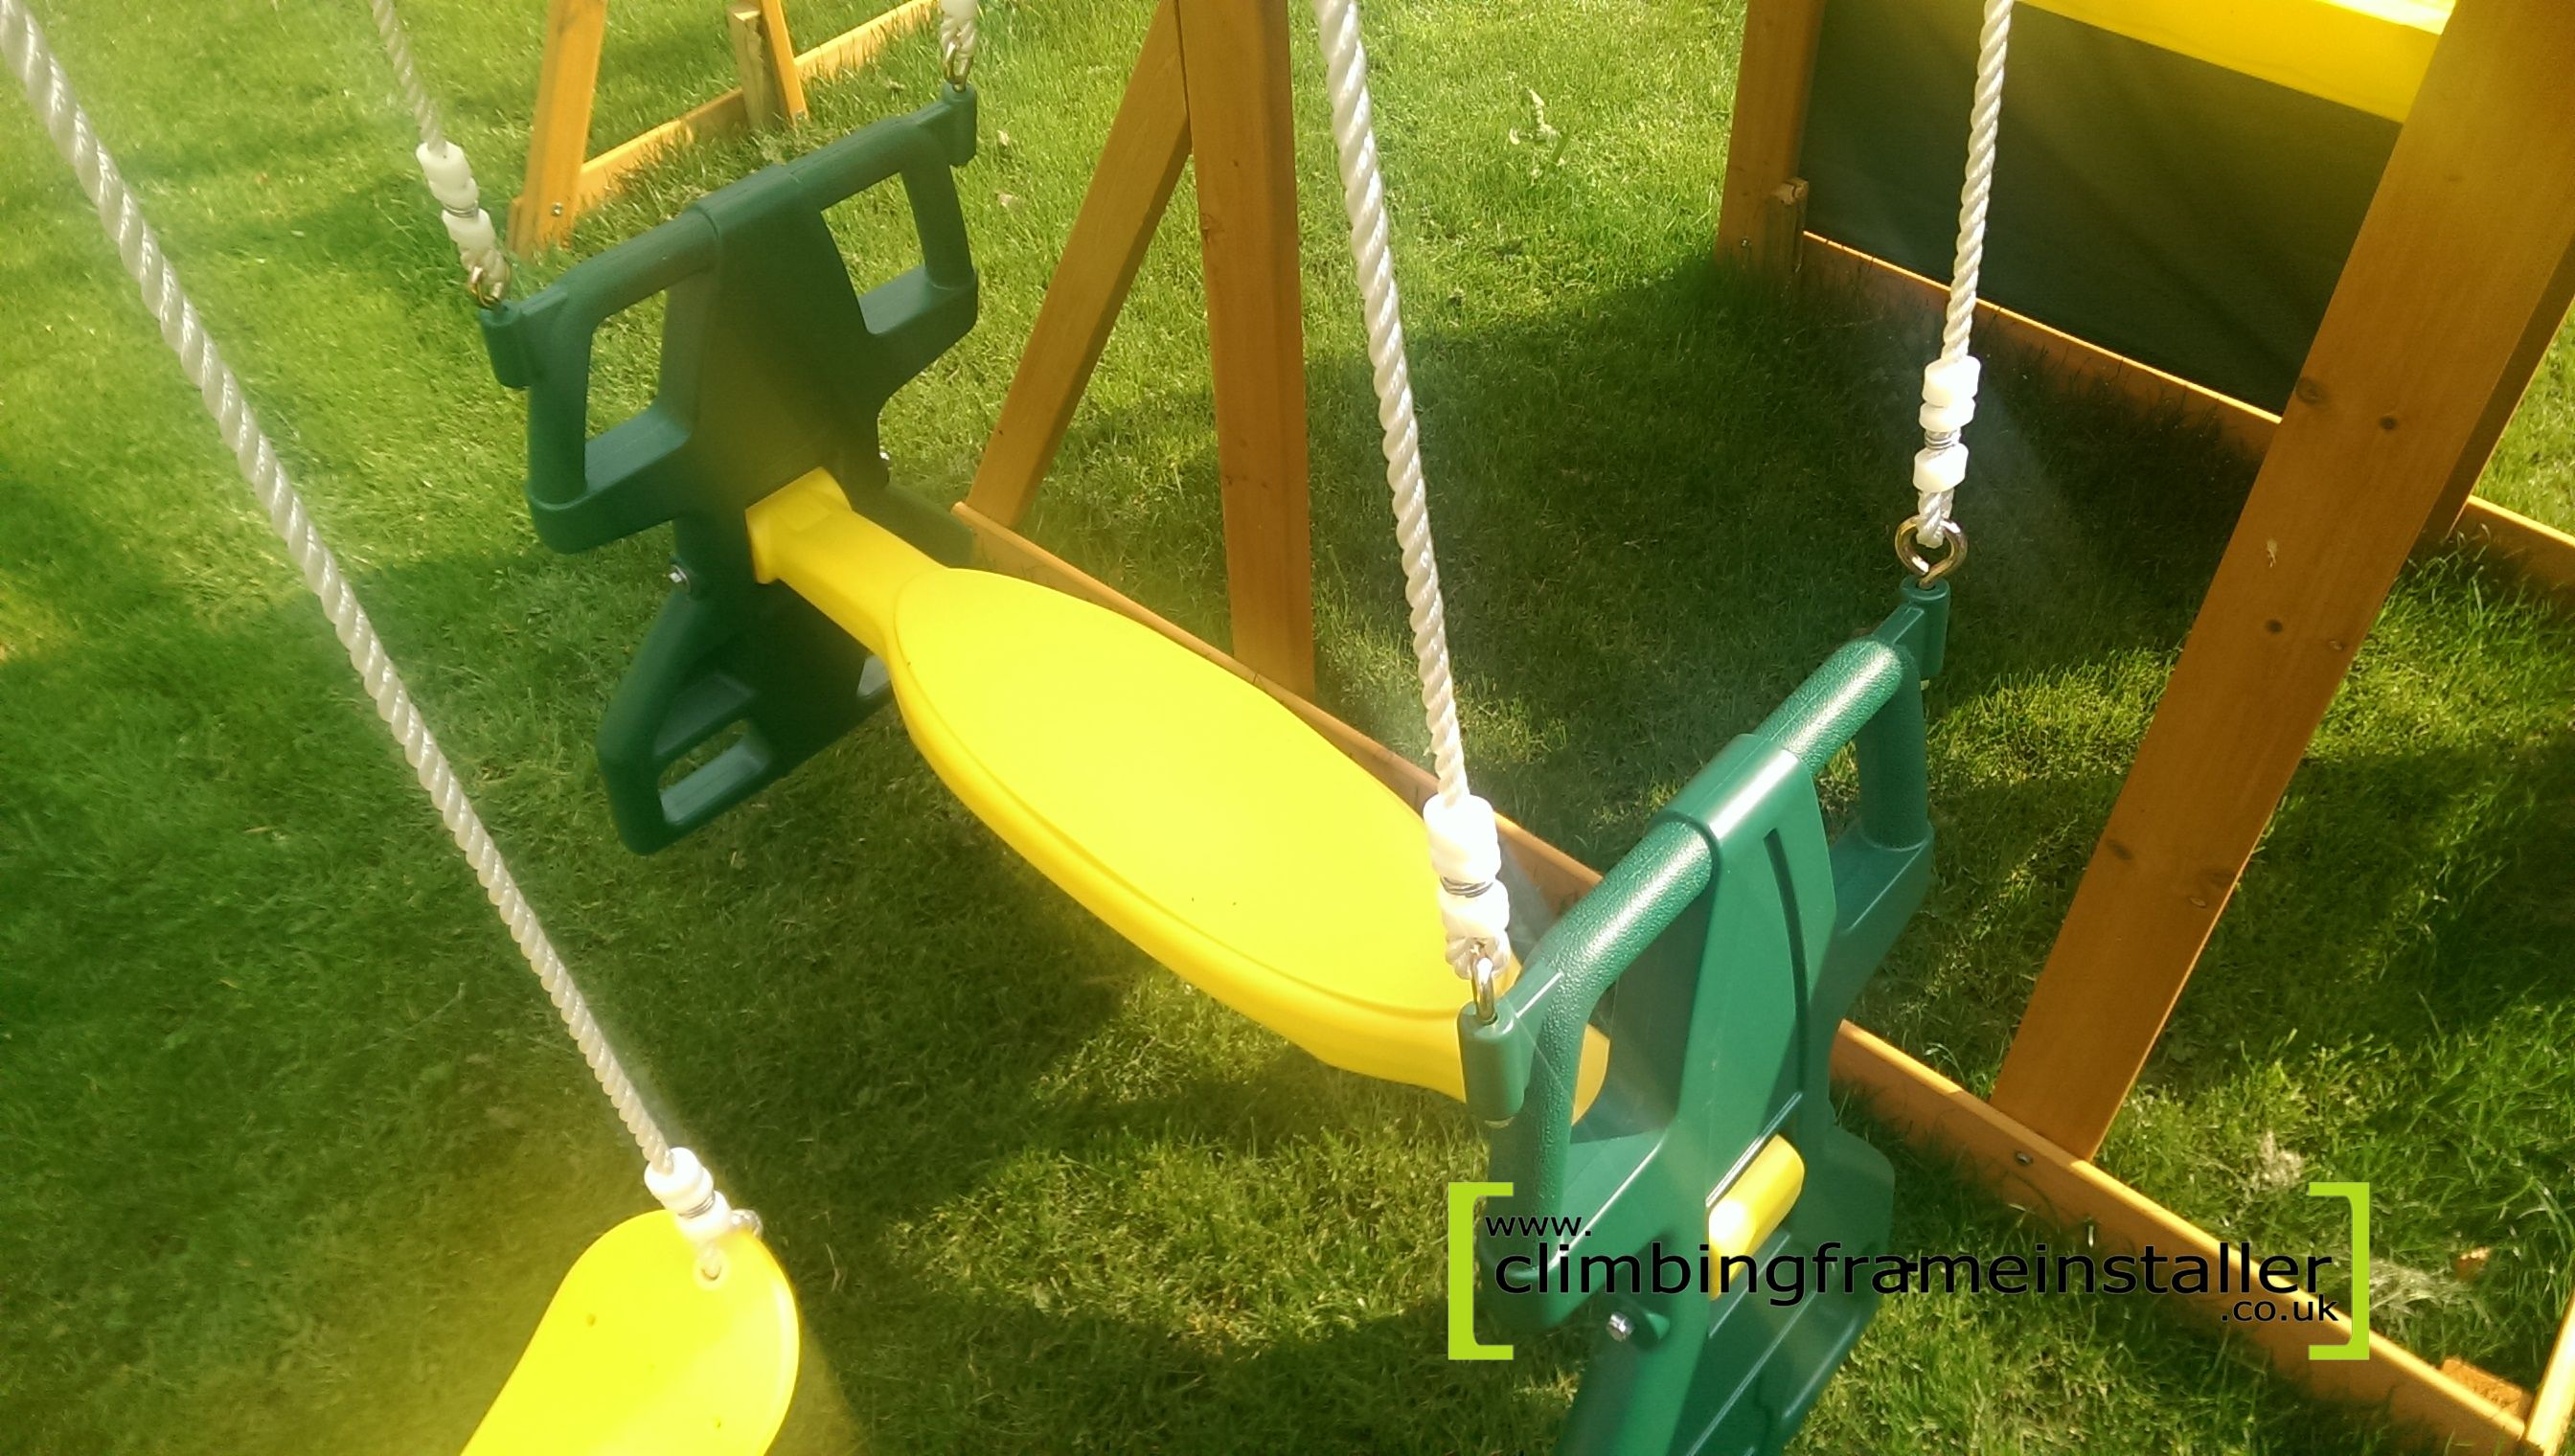 Selwood Climbing Frames with Swings